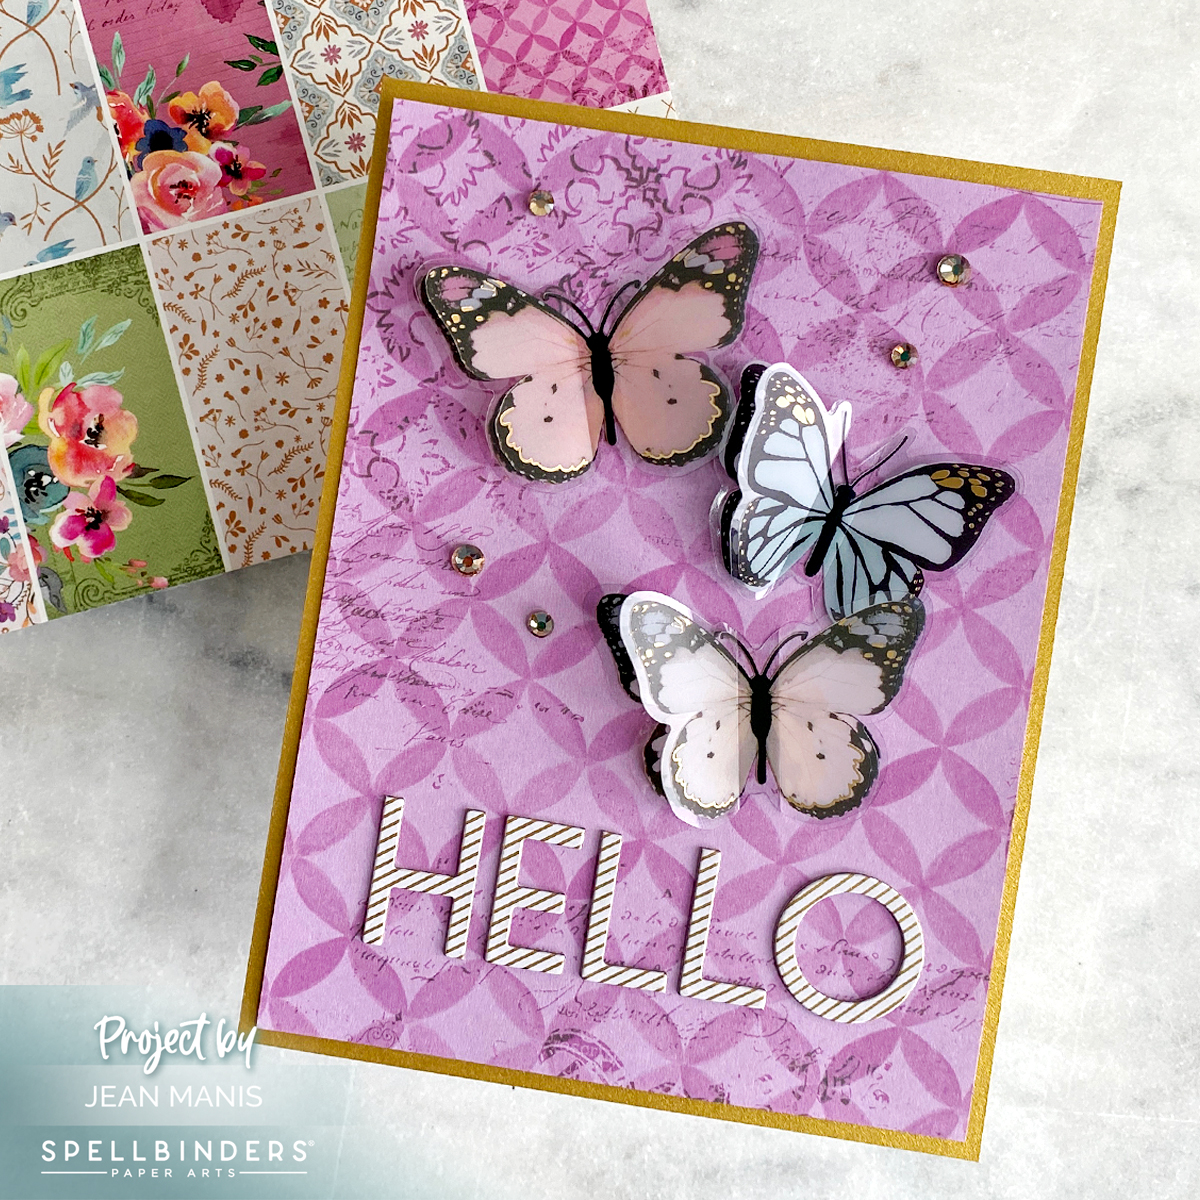 Spellbinders - Floral Friendship Dimensional Butterfly Stickers